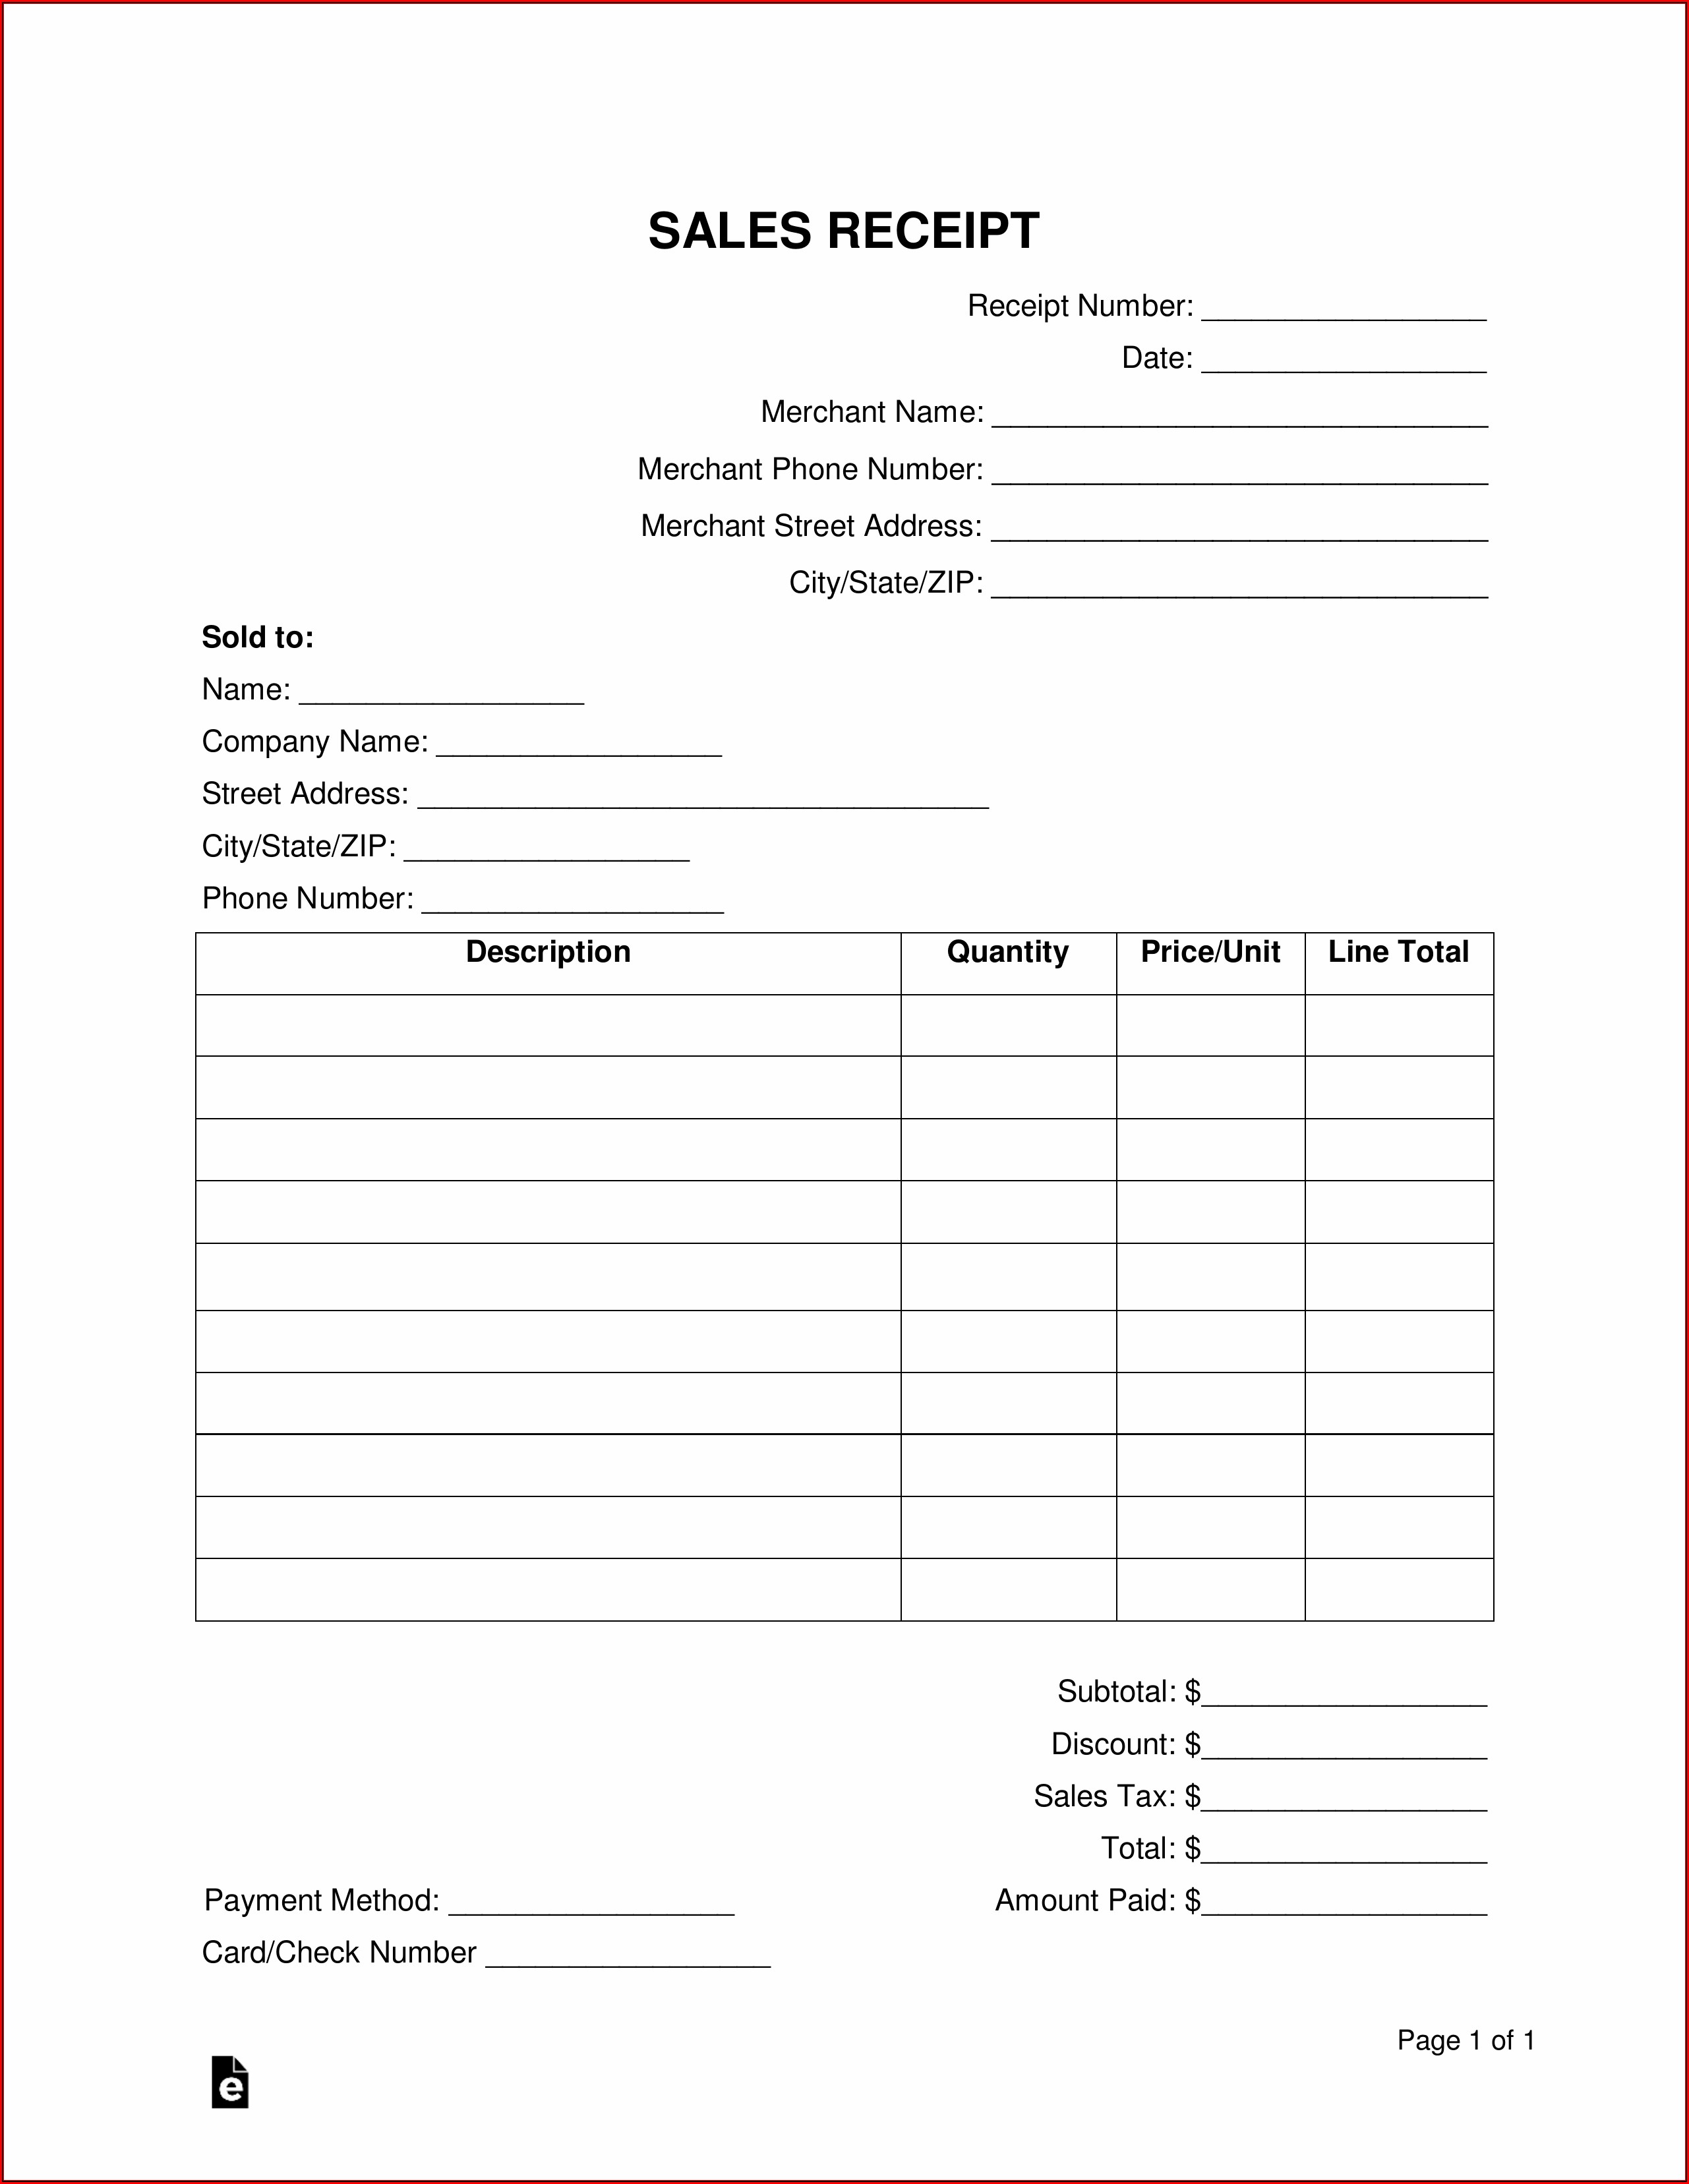 Abortion Receipt Template Template 2 Resume Examples edV1LmLYq6